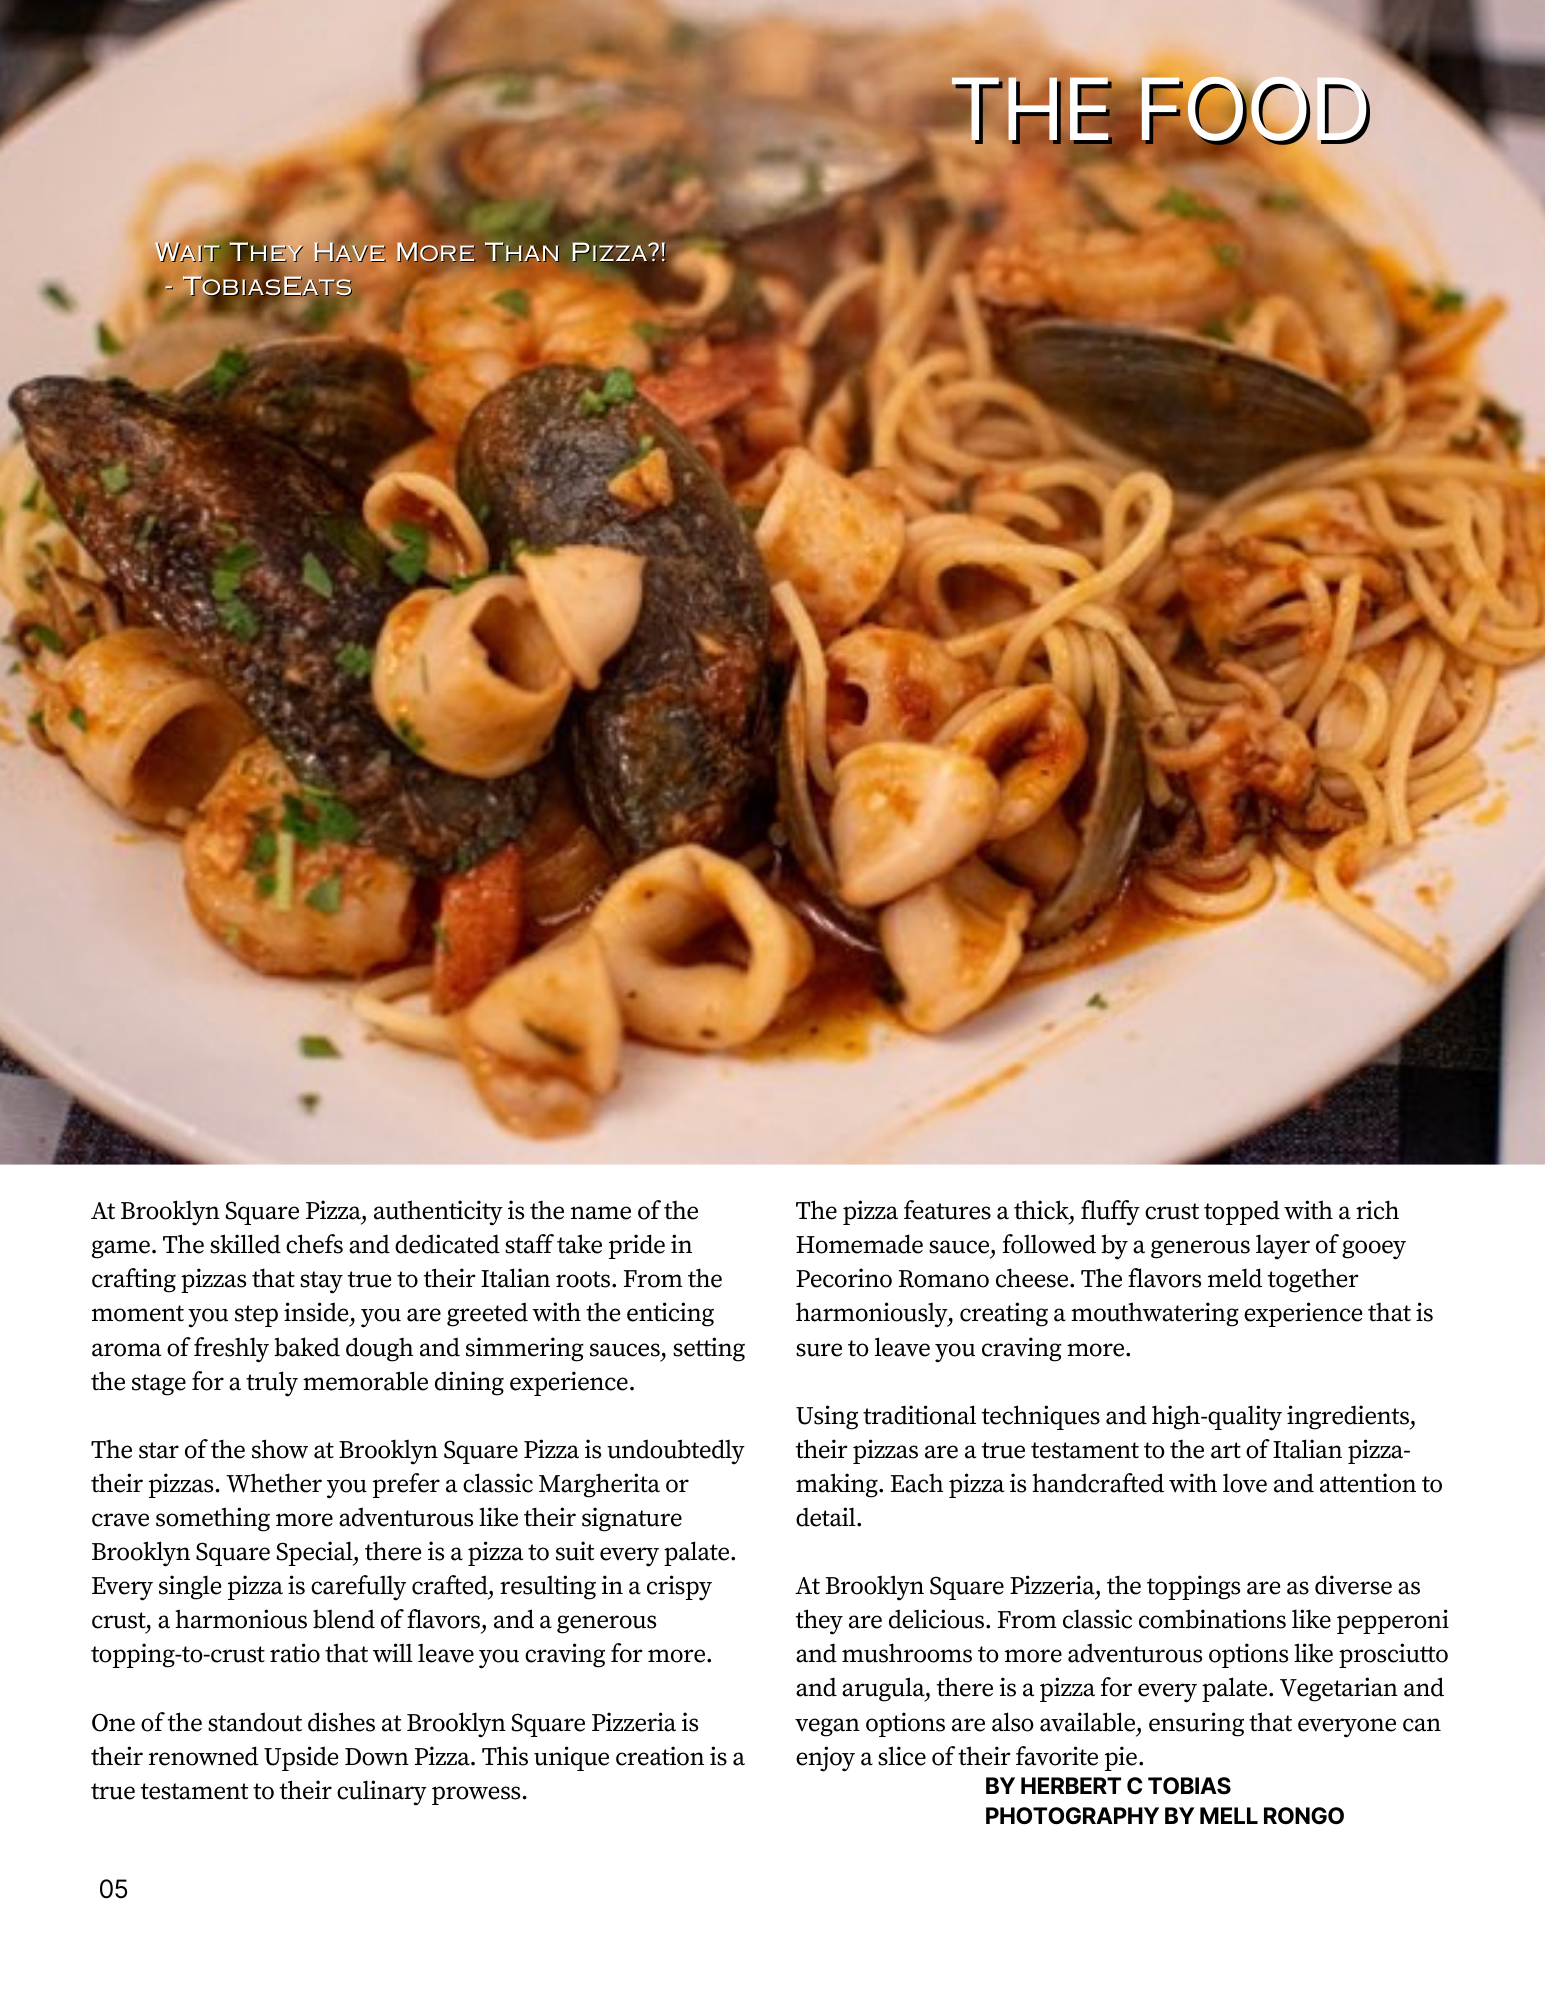 Brooklyn Square Puzza - Article Spread 3 - Left Side.PNG